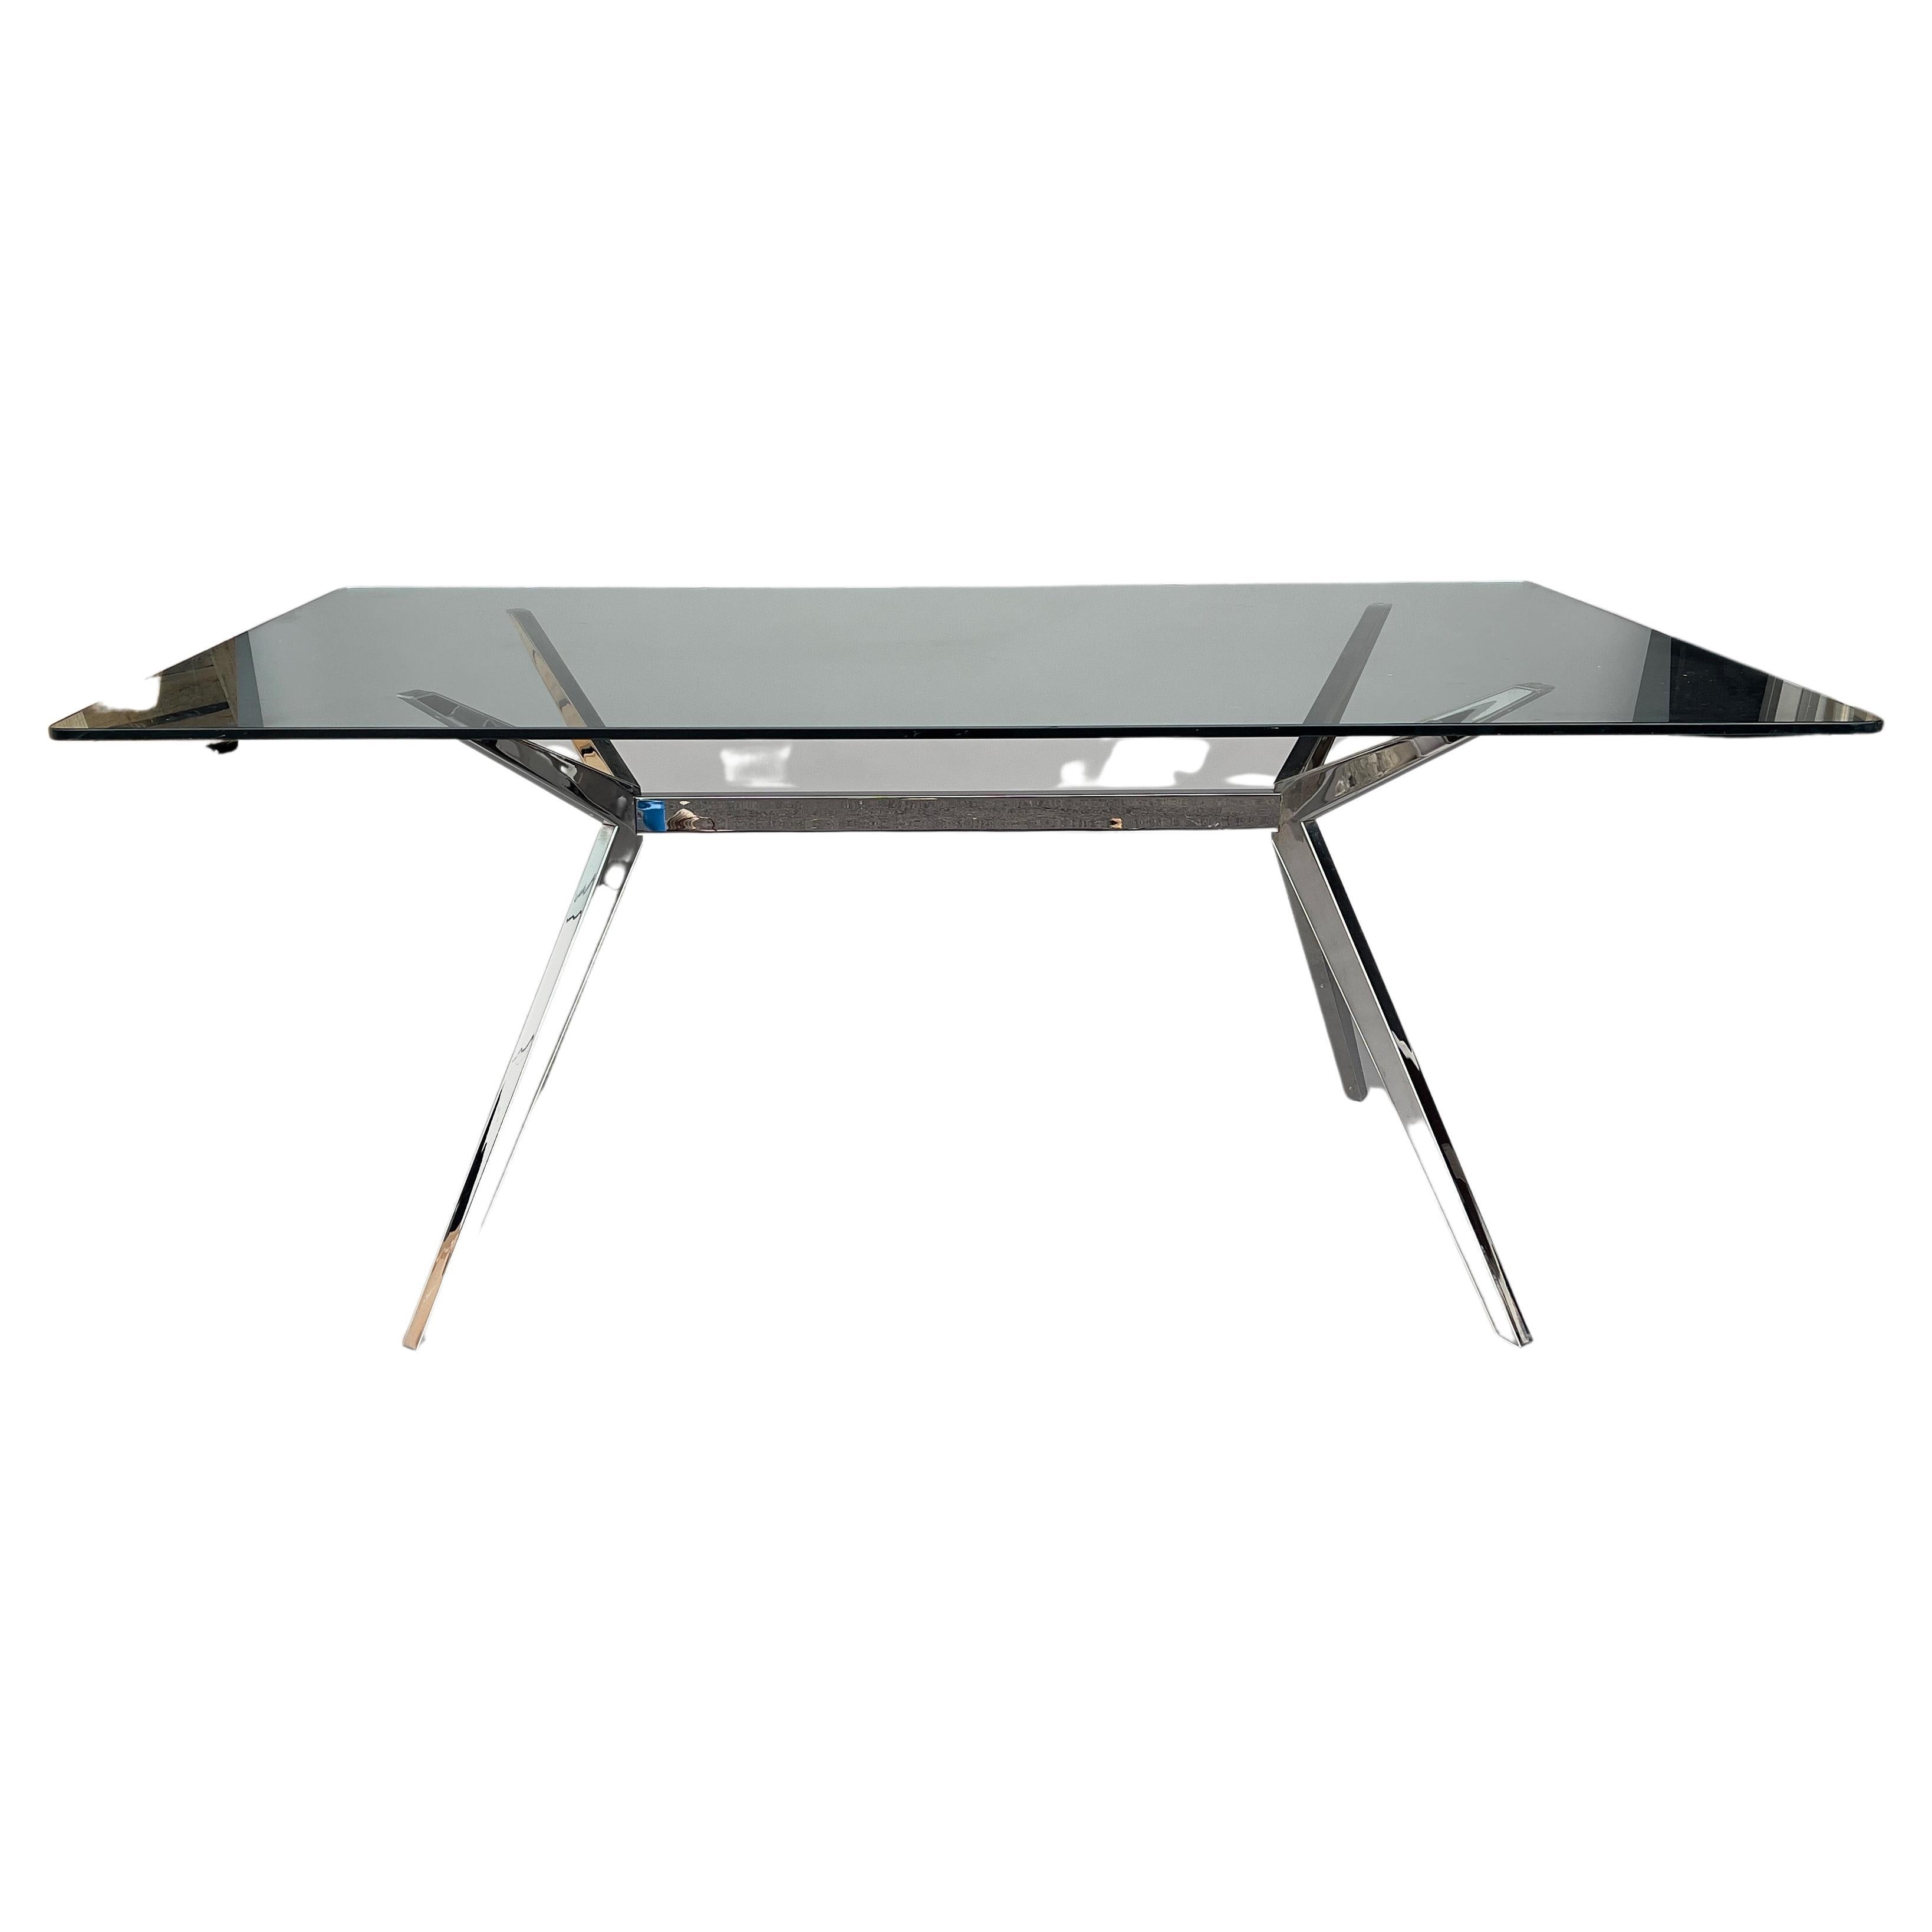 Fendi Chrome Dining Table with Glass Top